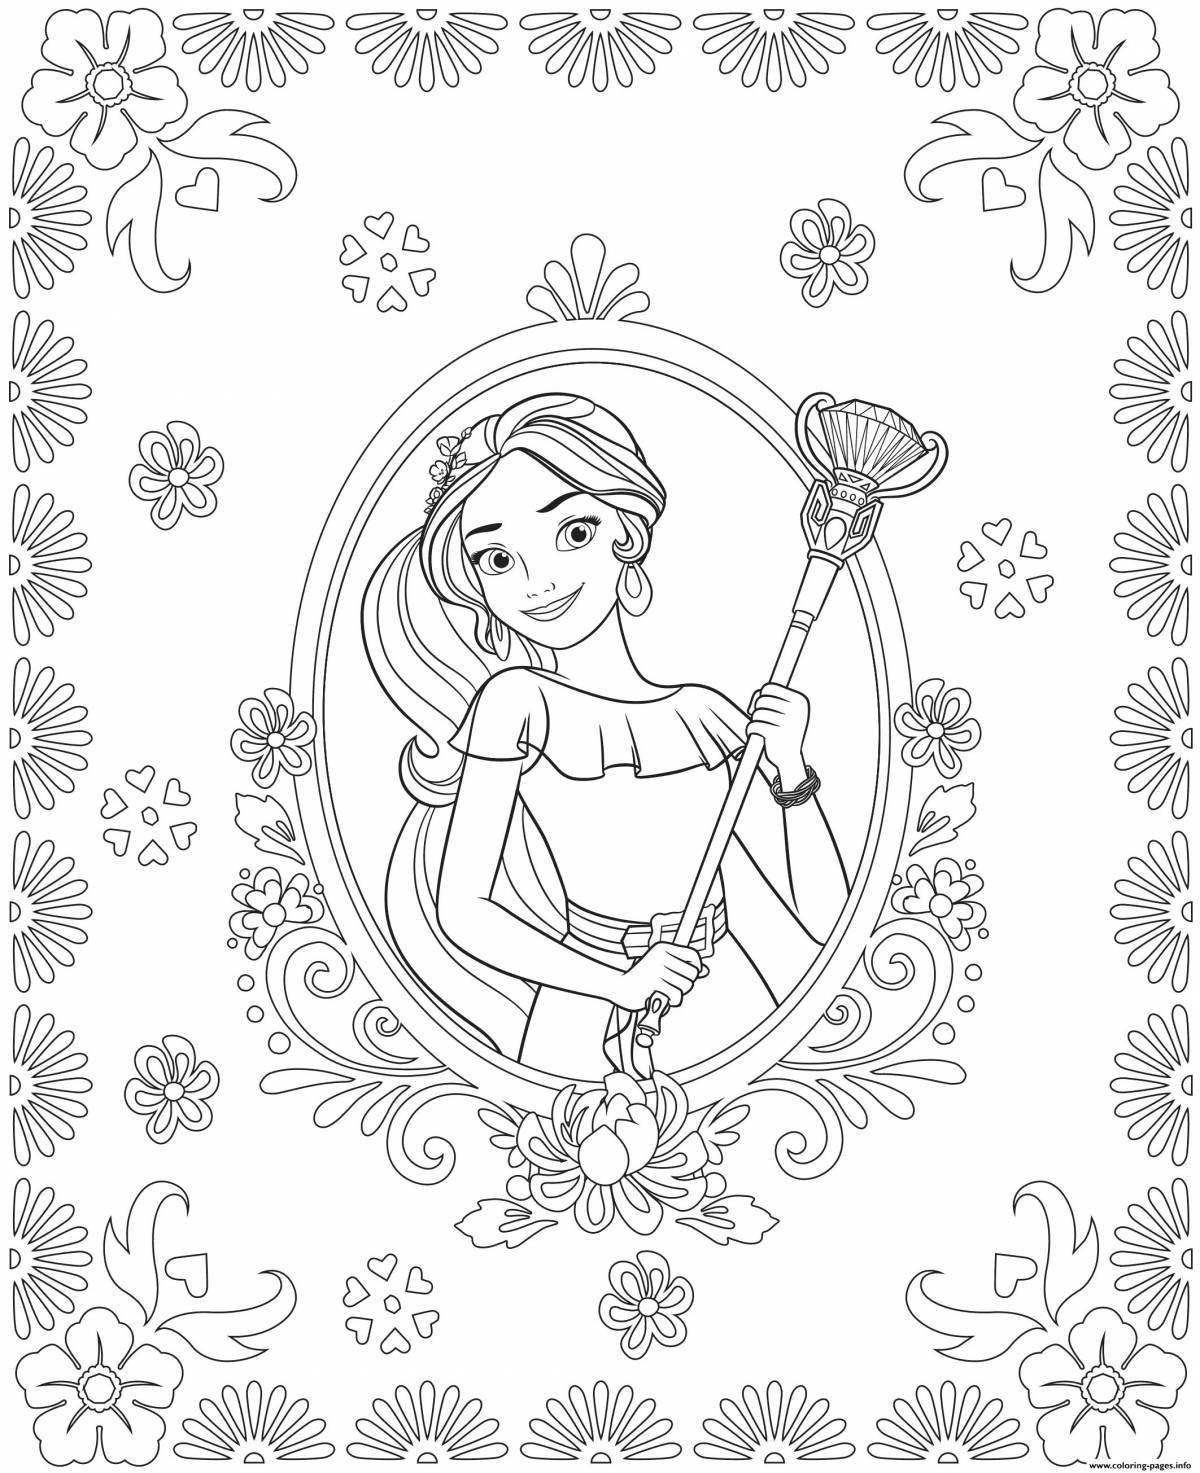 Wonderful elena lovely coloring book